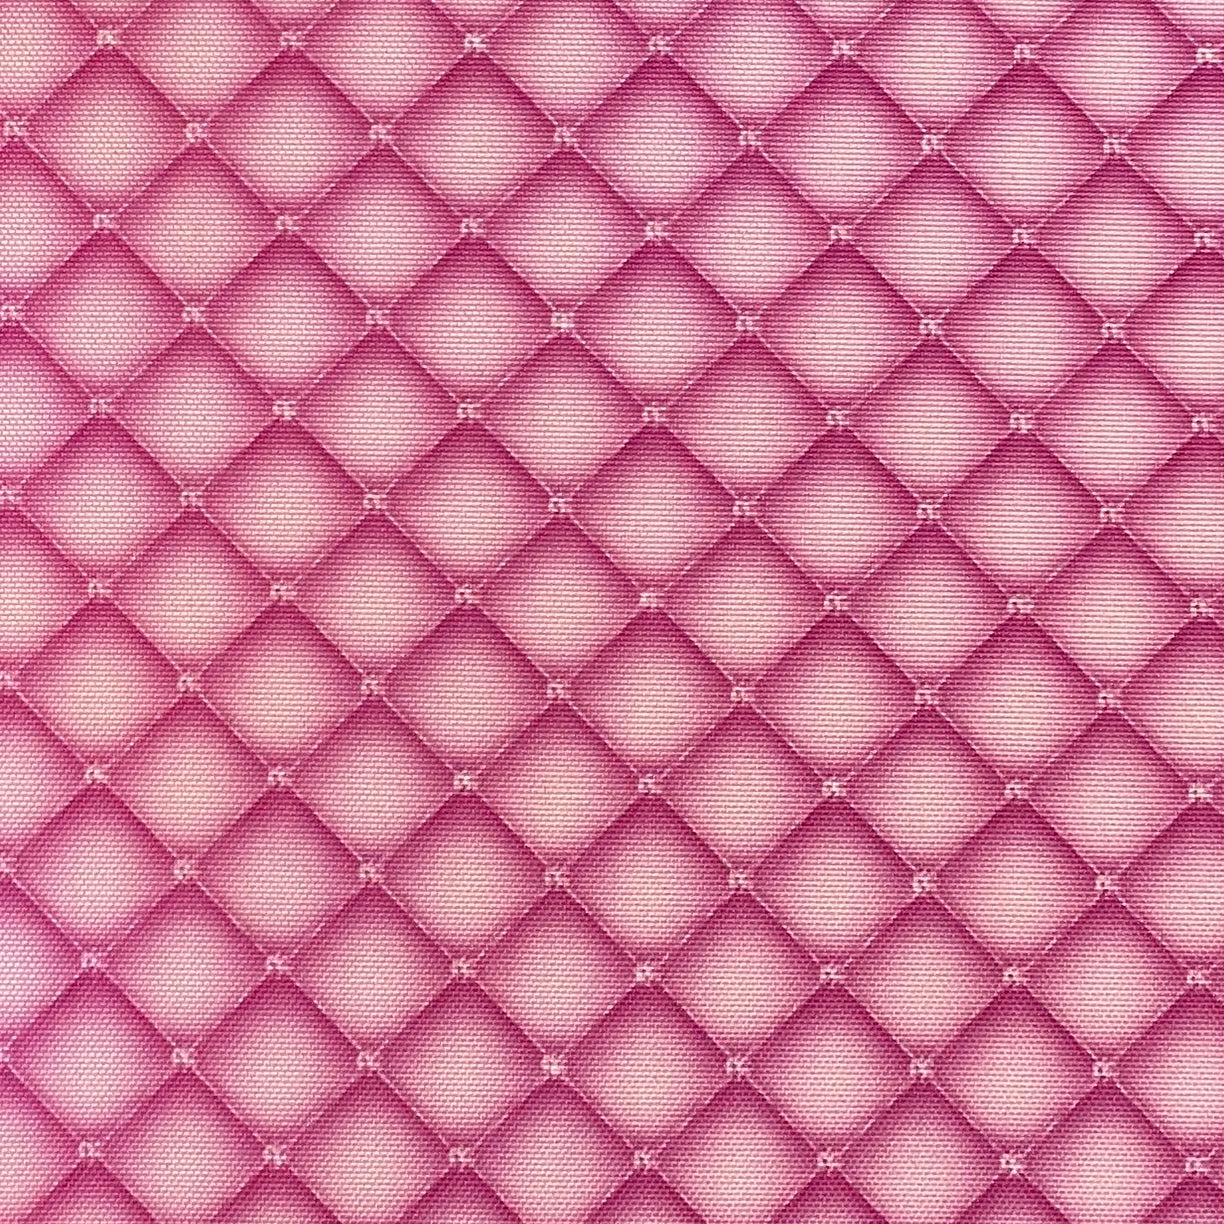 Tufted Hot Pink Waterproof Oxford